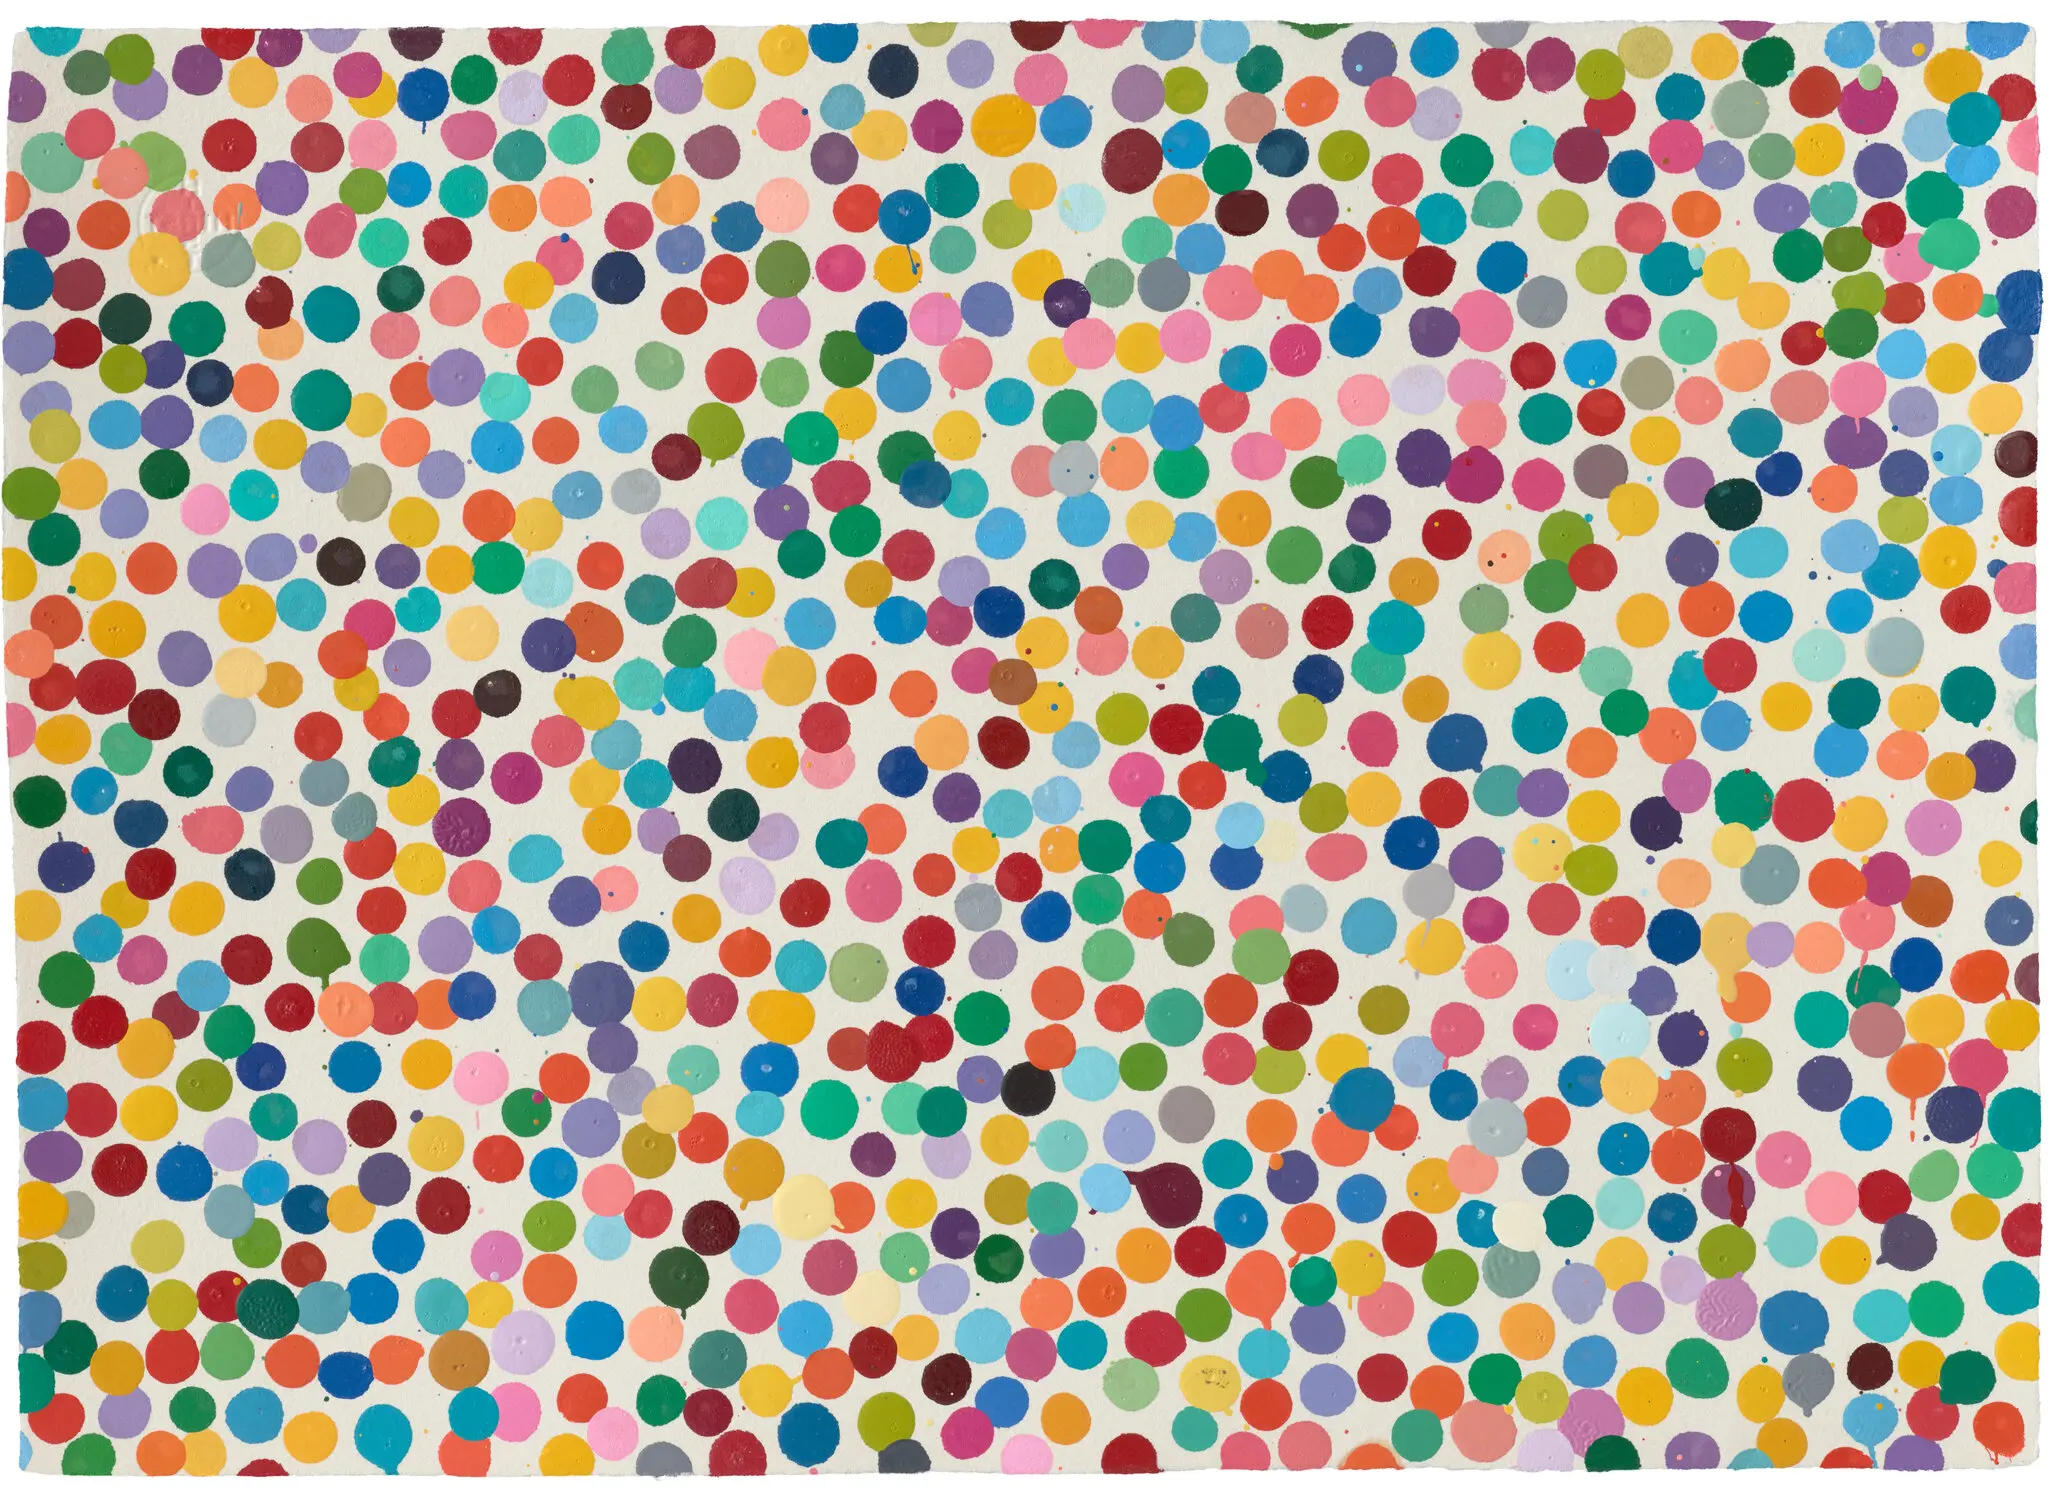 Damien Hirst (b.1965) Signed ‘SUN SHINE’ by Gallery HENI for Claridge's Art Space Exhibition, 202... - Image 7 of 8